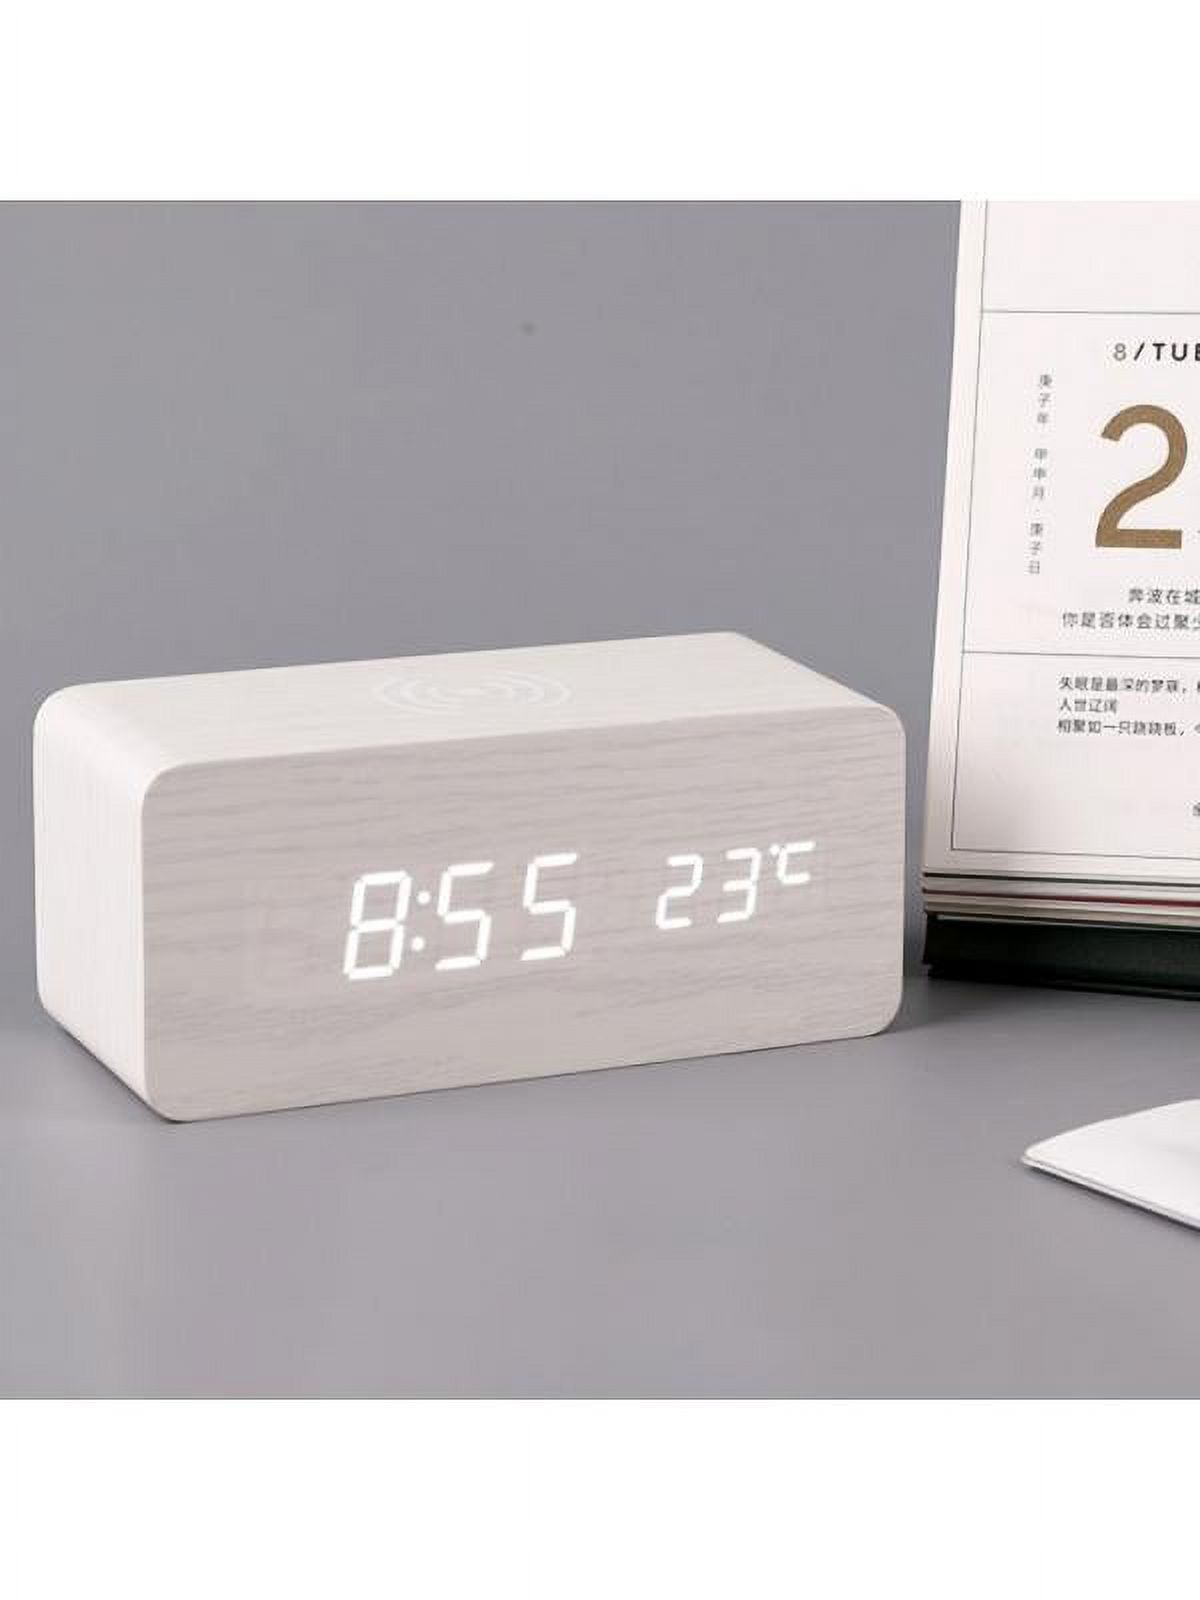 Dragonus Modern Wooden Electric Digital LED Desk Alarm Clock Thermometer Wireless Charger - image 2 of 4